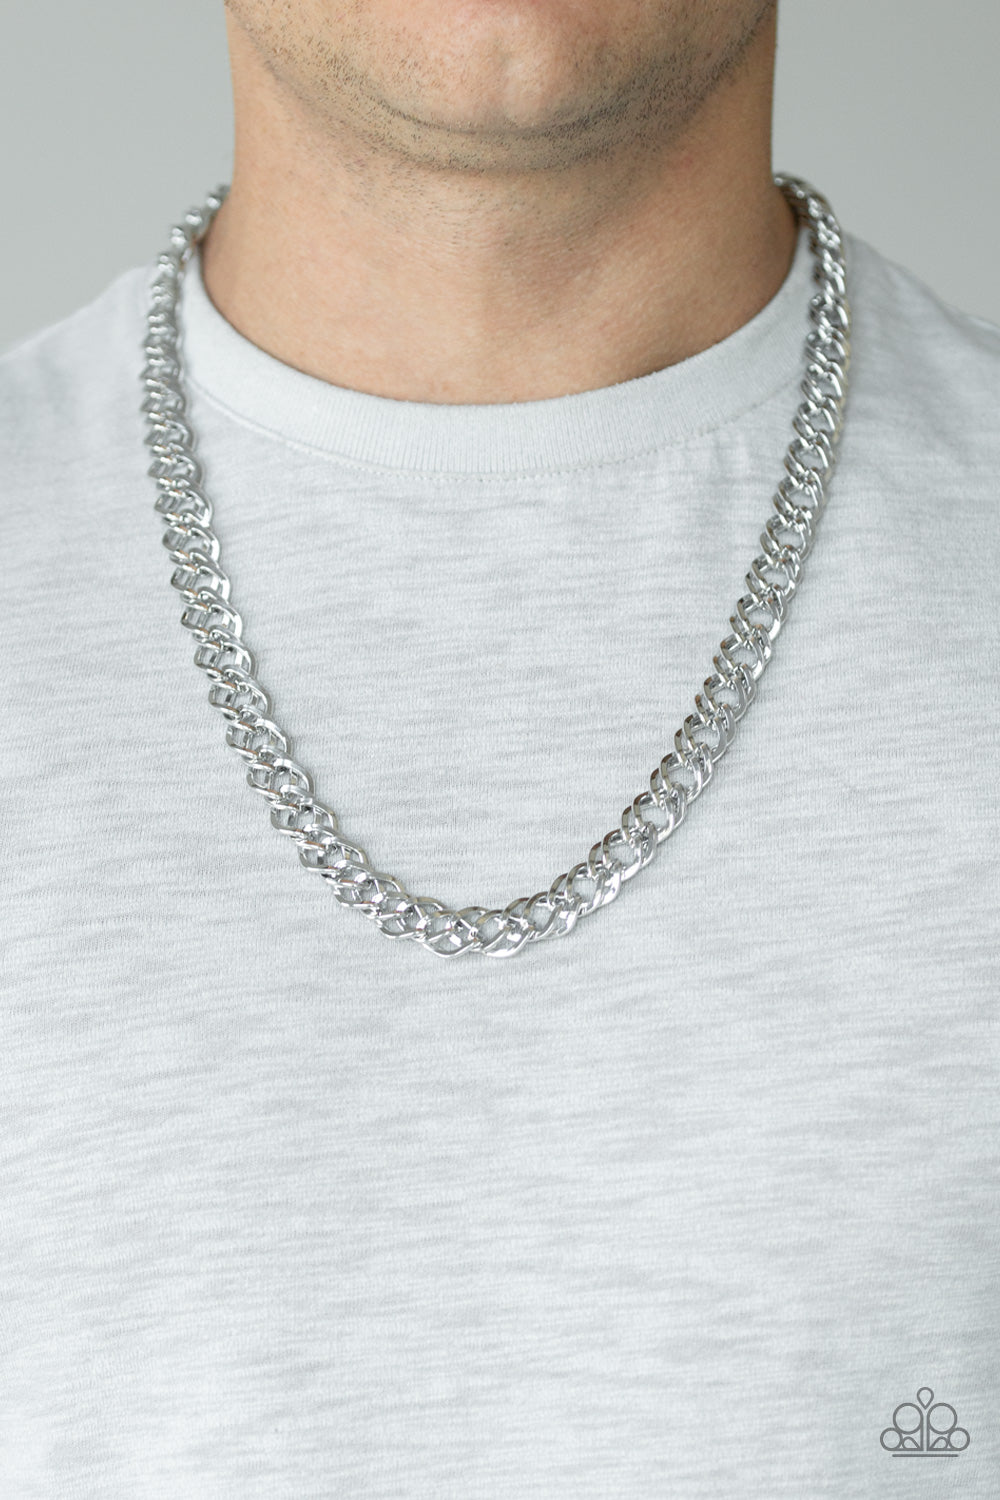 Undefeated Silver Necklace Paparazzi Accessories